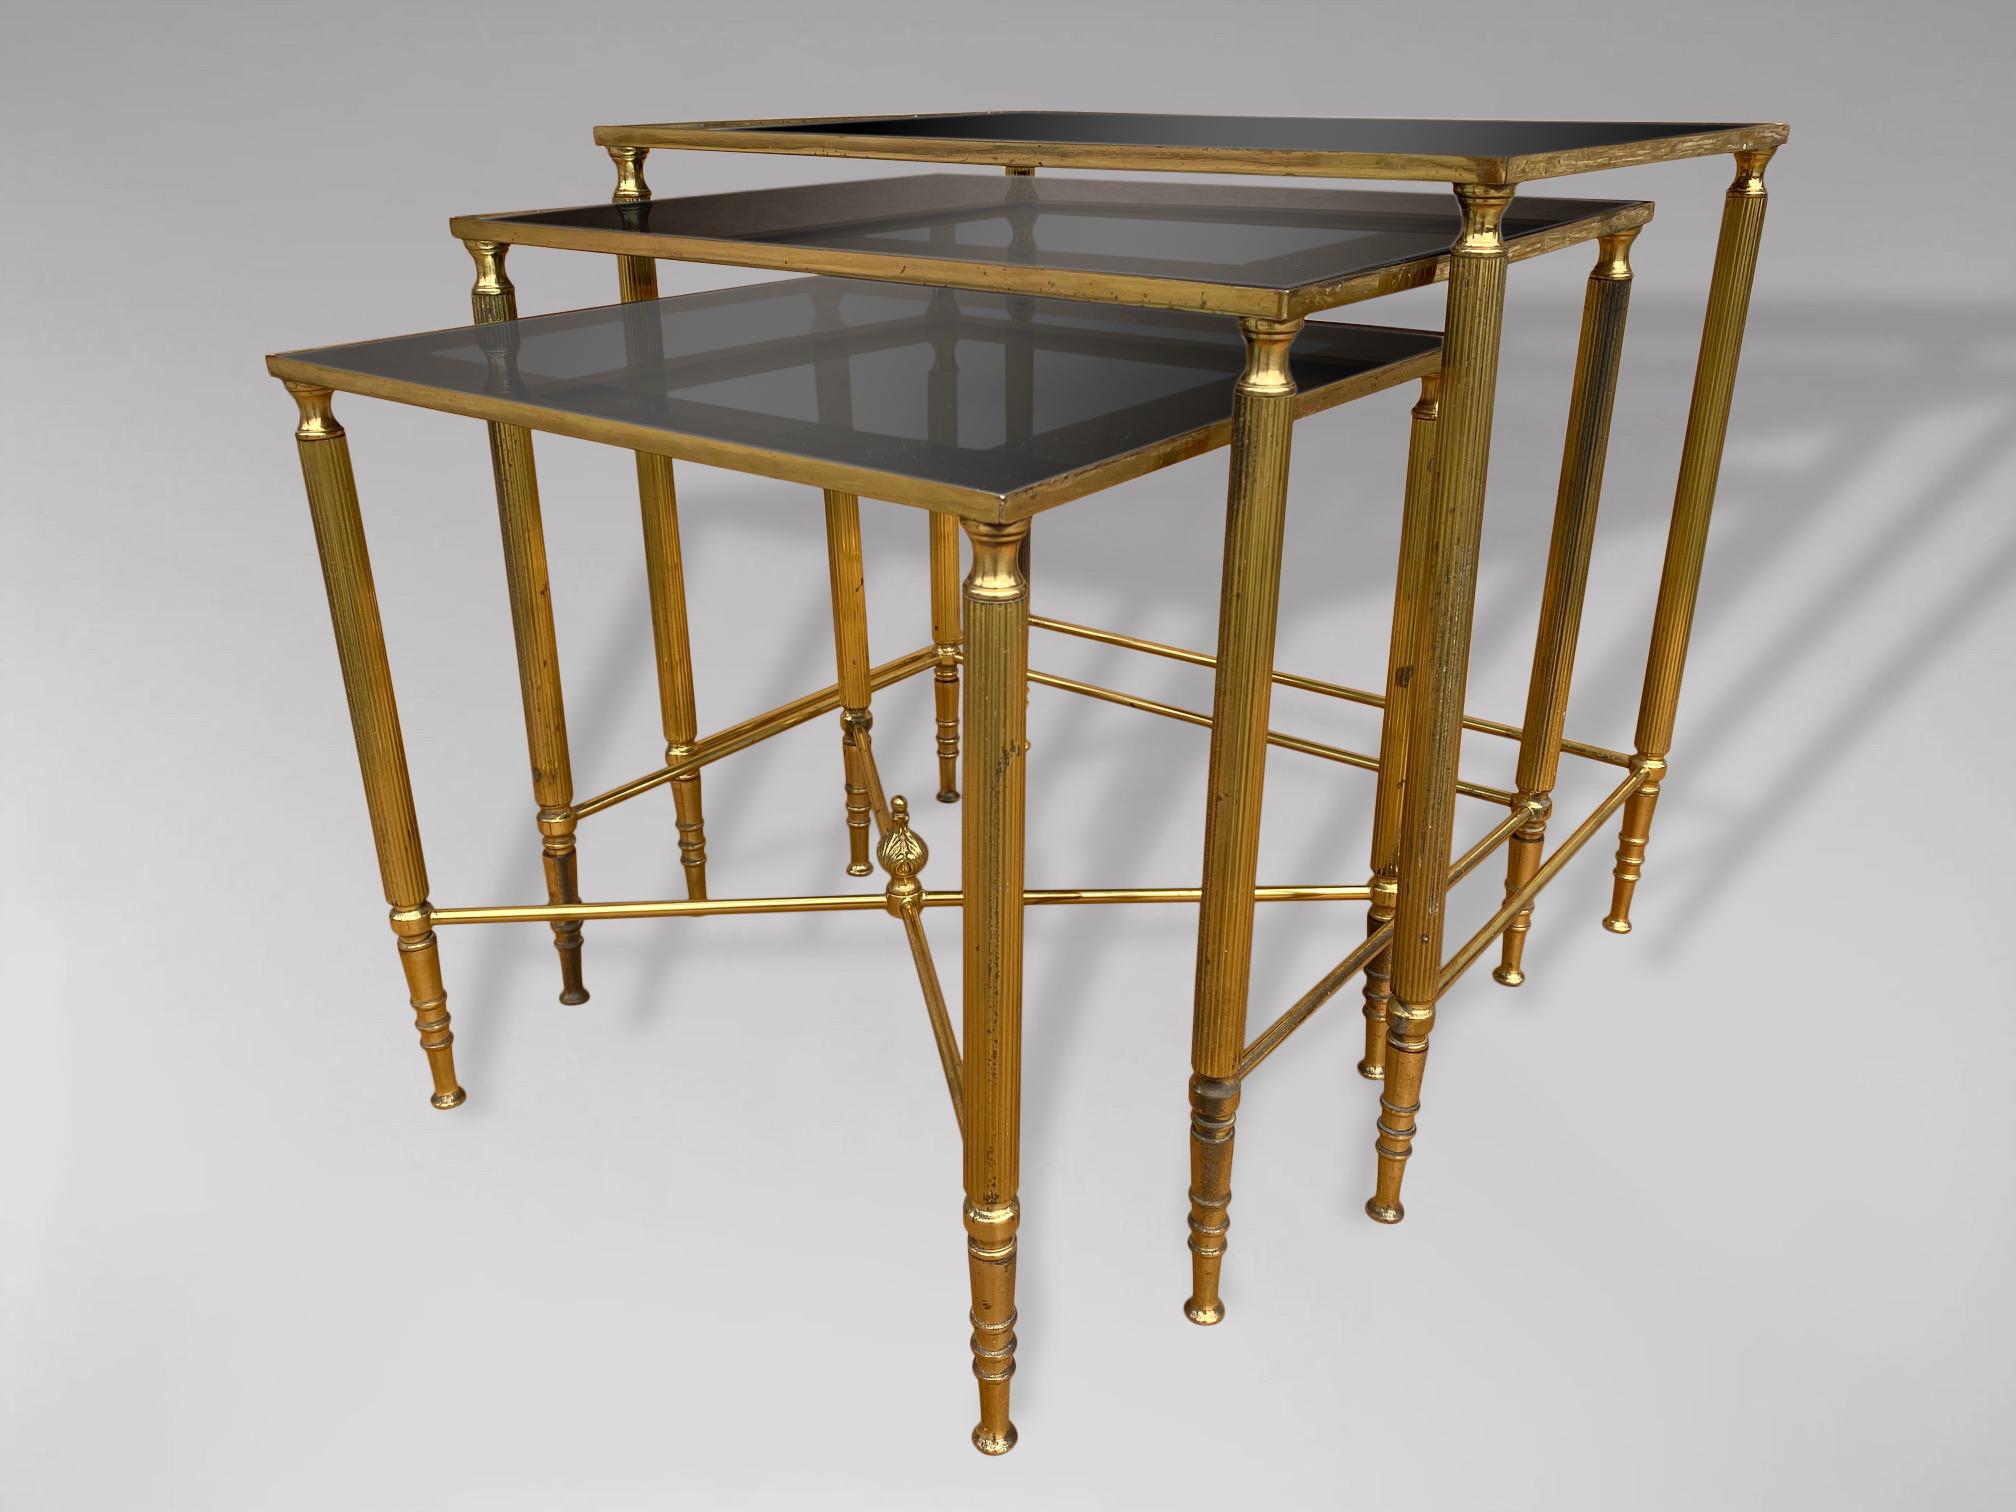 Hand-Crafted 20th Century Nest of 3 Brass Tables with Smoked Glass and Mirror Frame Tops